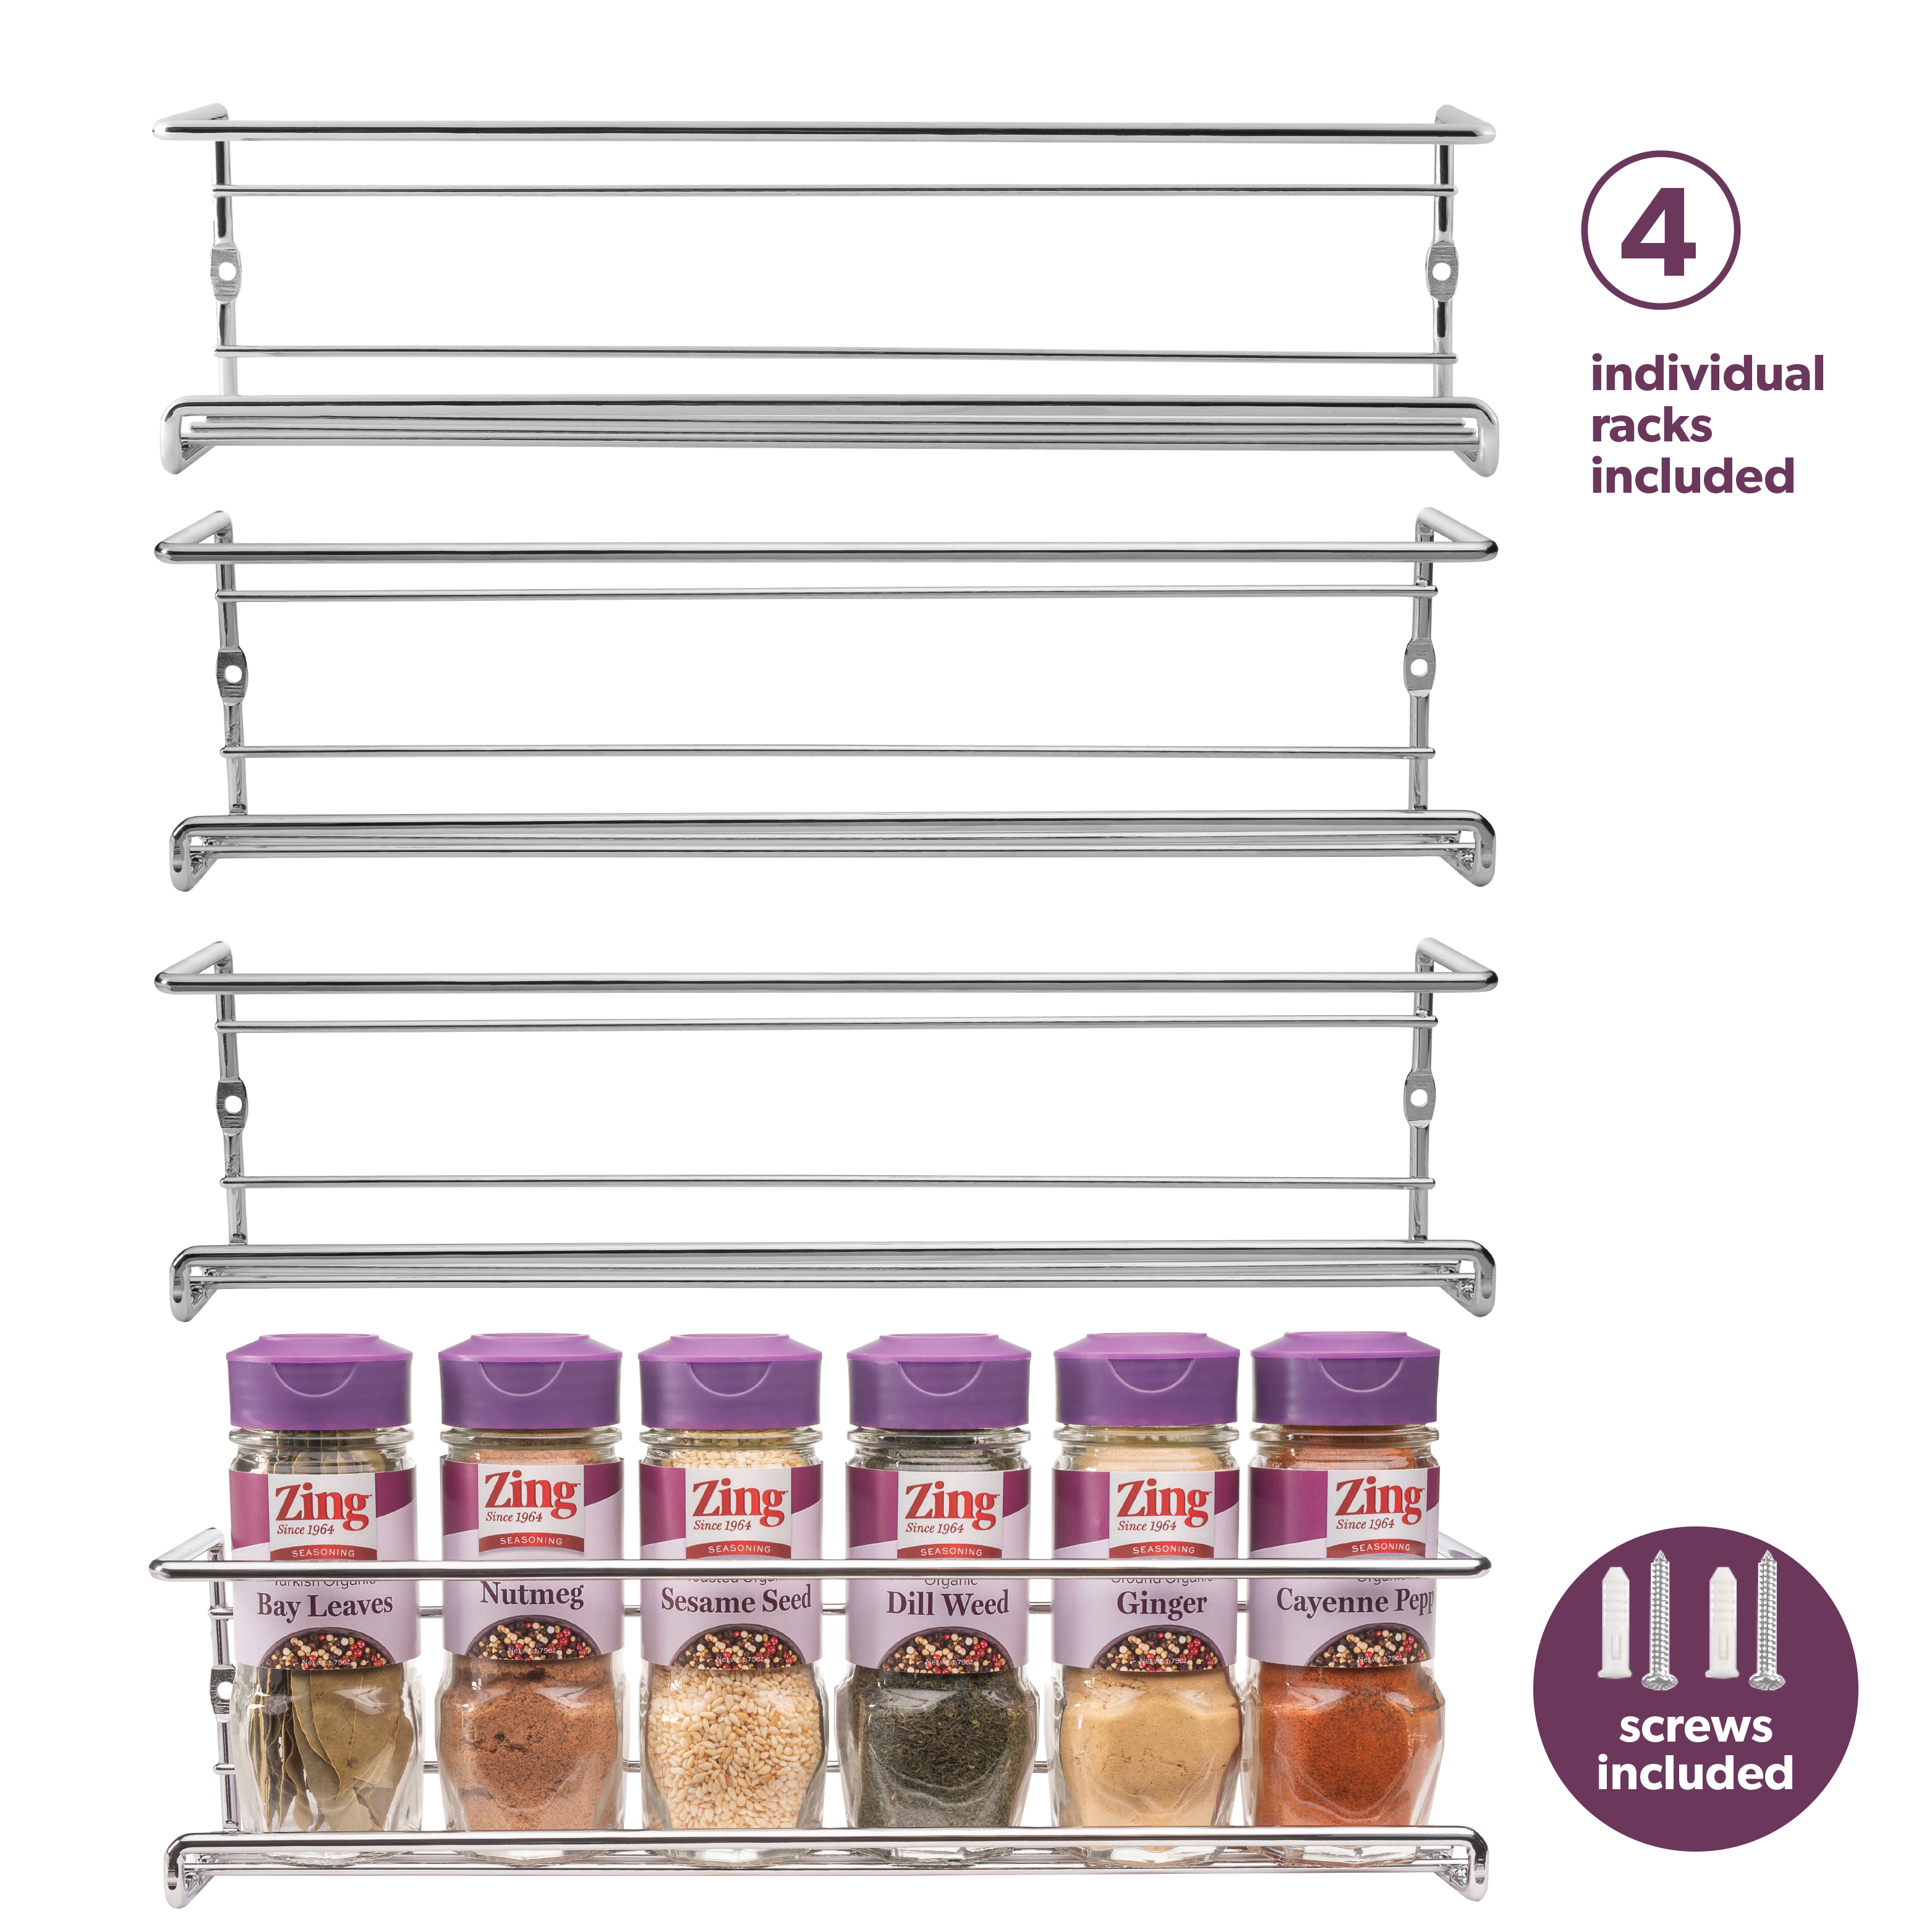 Details about   SWOMMOLY Wall Mount Spice Rack 6 Pack Large-capacity Spice Racks Stackable Fol 